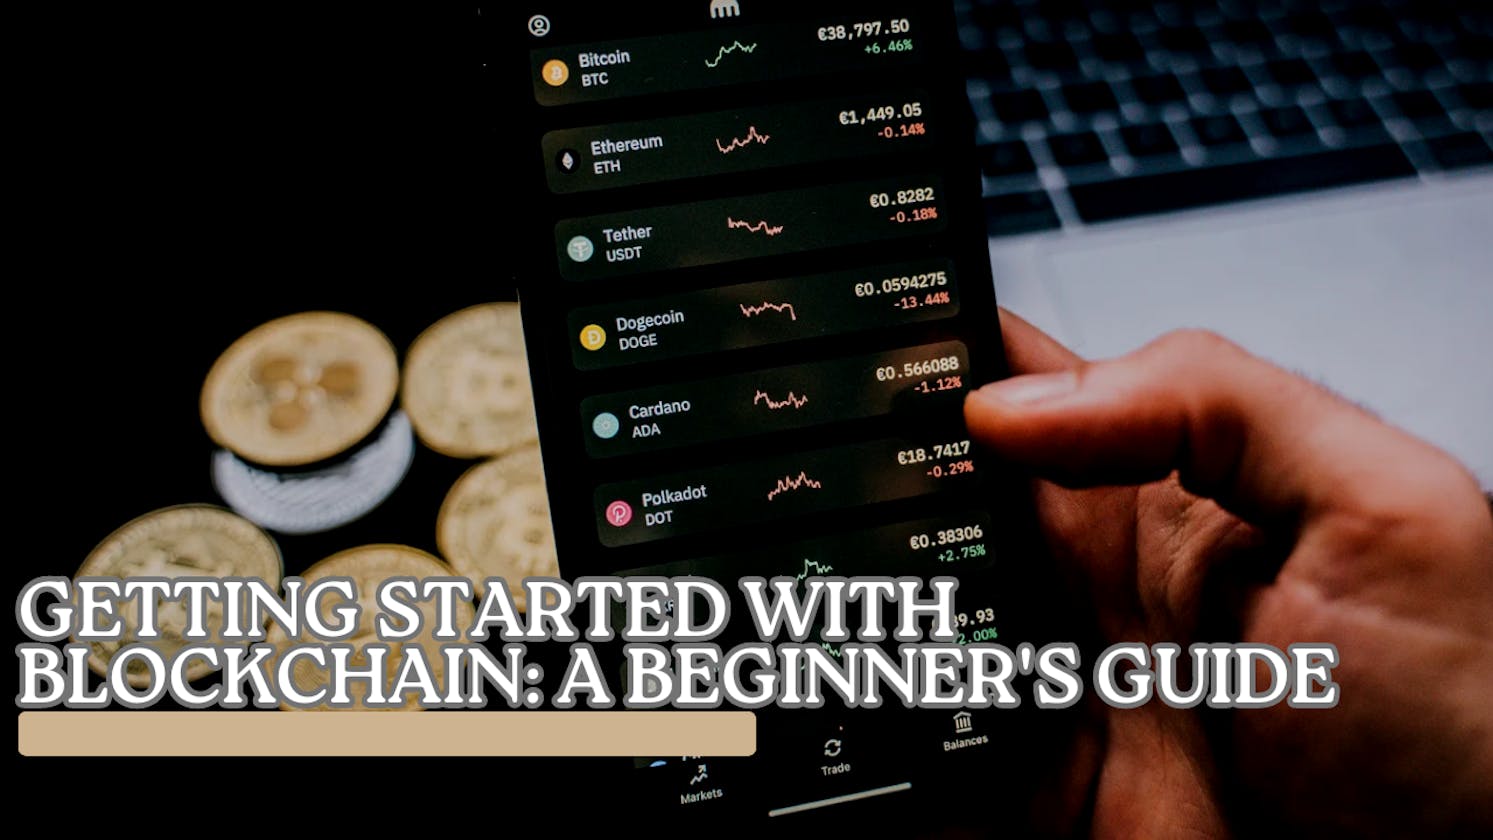 Getting Started with Blockchain: A Beginner's Guide